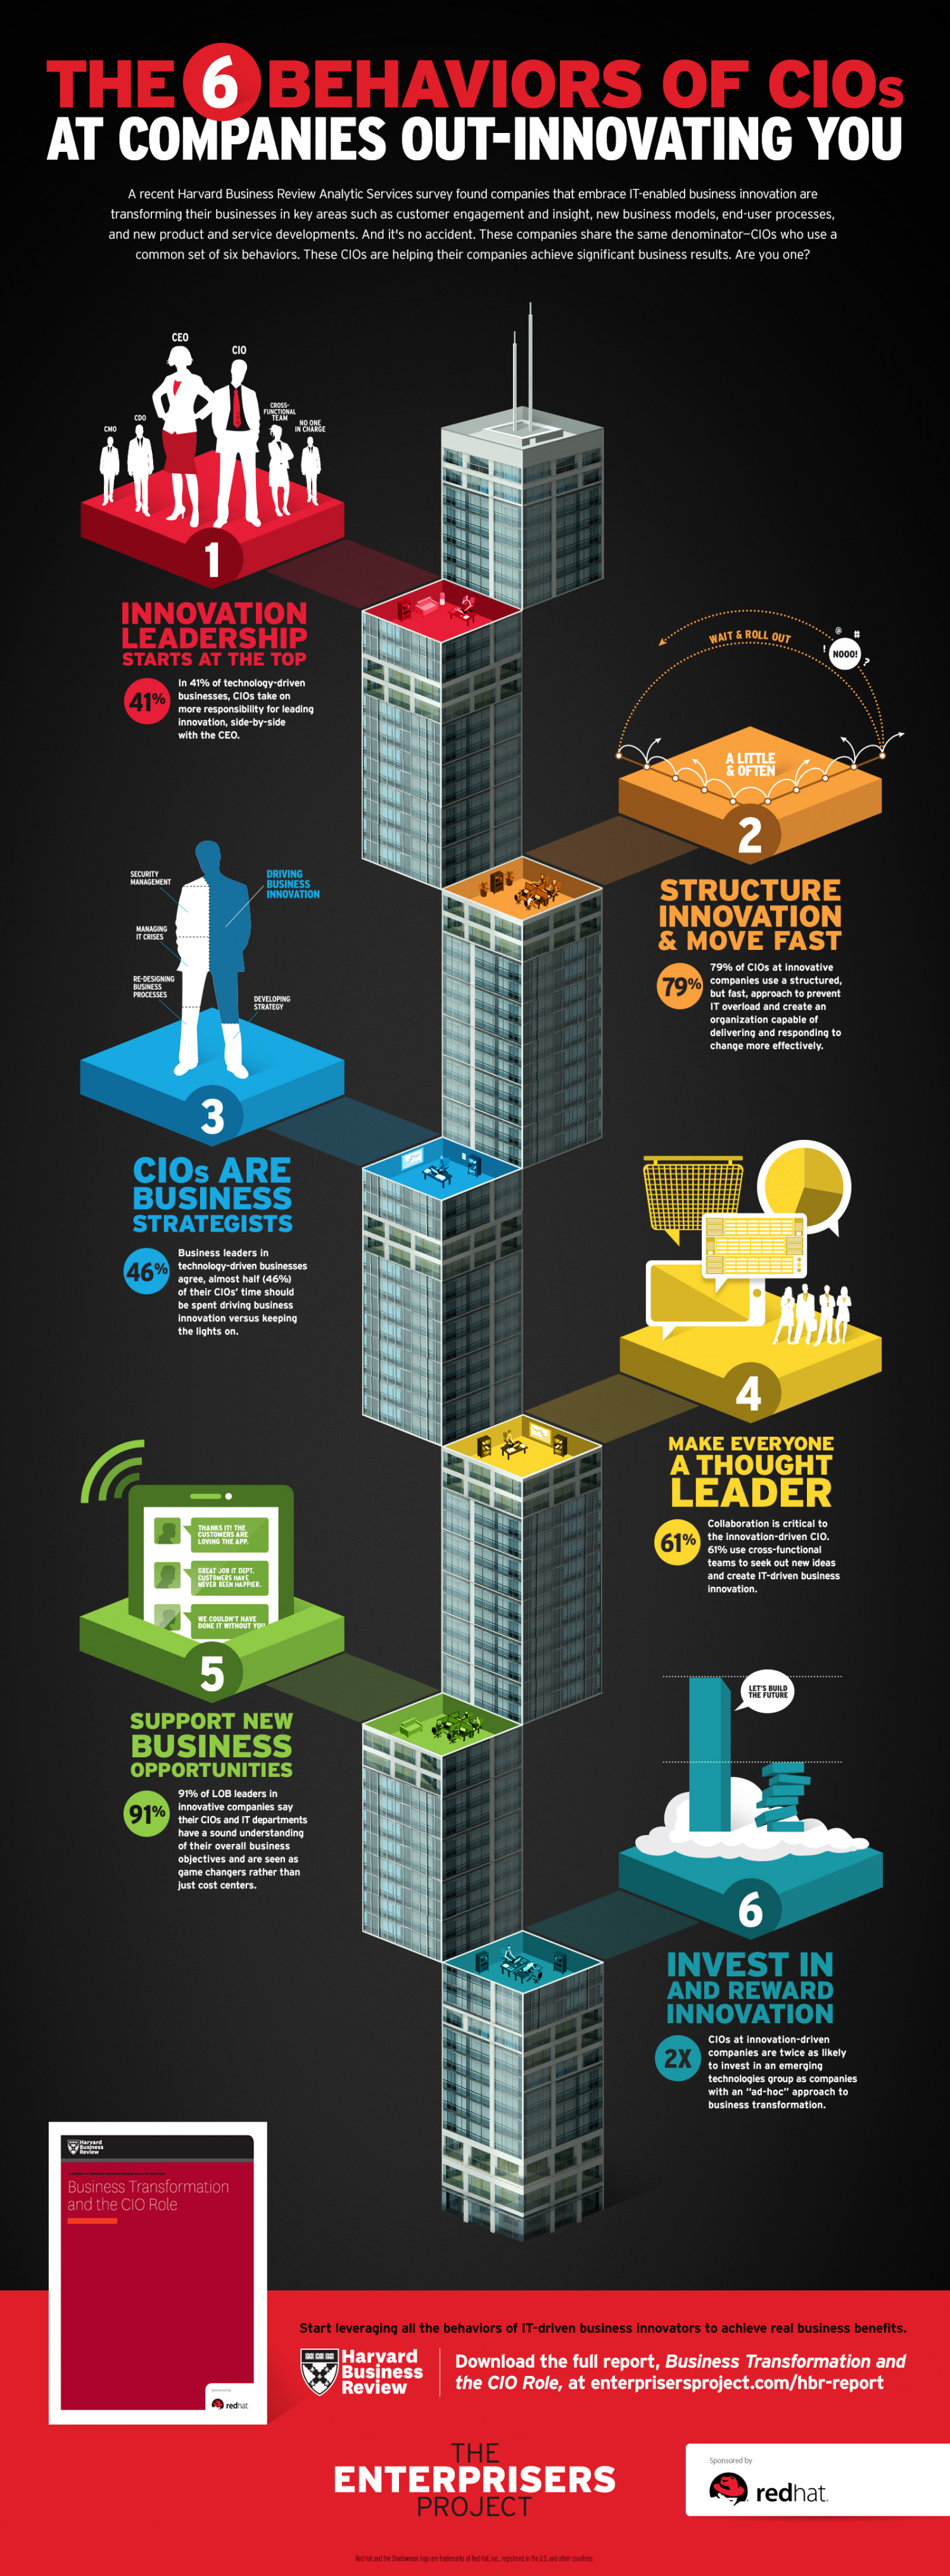 The 6 Behaviors of CIOs at Companies Out-Innovating you Infographic